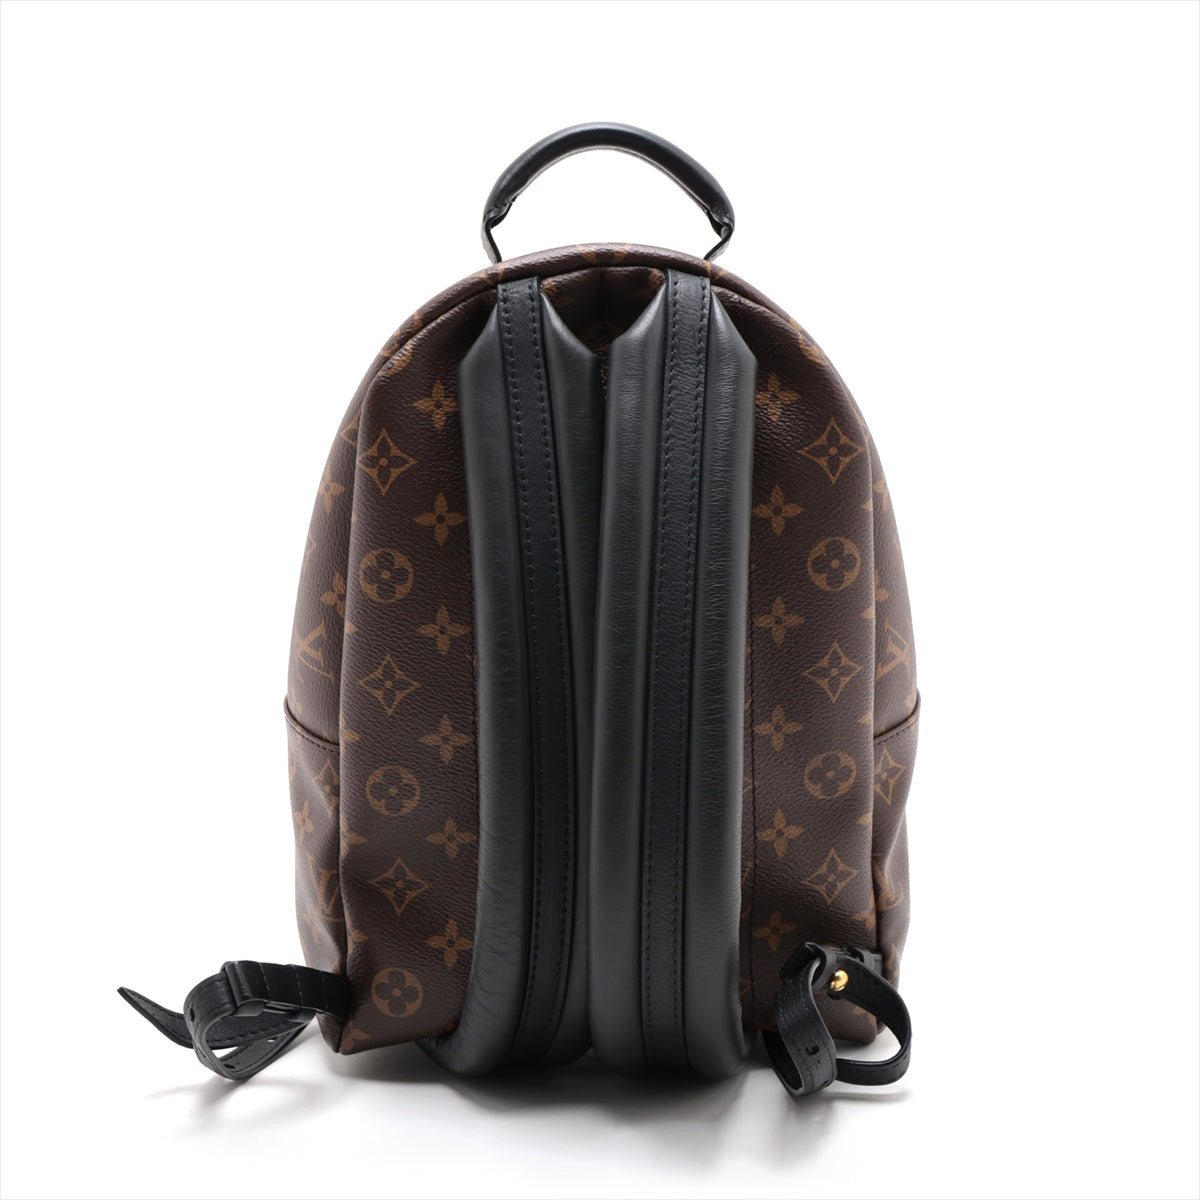 Louis Vuitton Monogram Palm Springs bag pack mm M44871 There was an RFID response